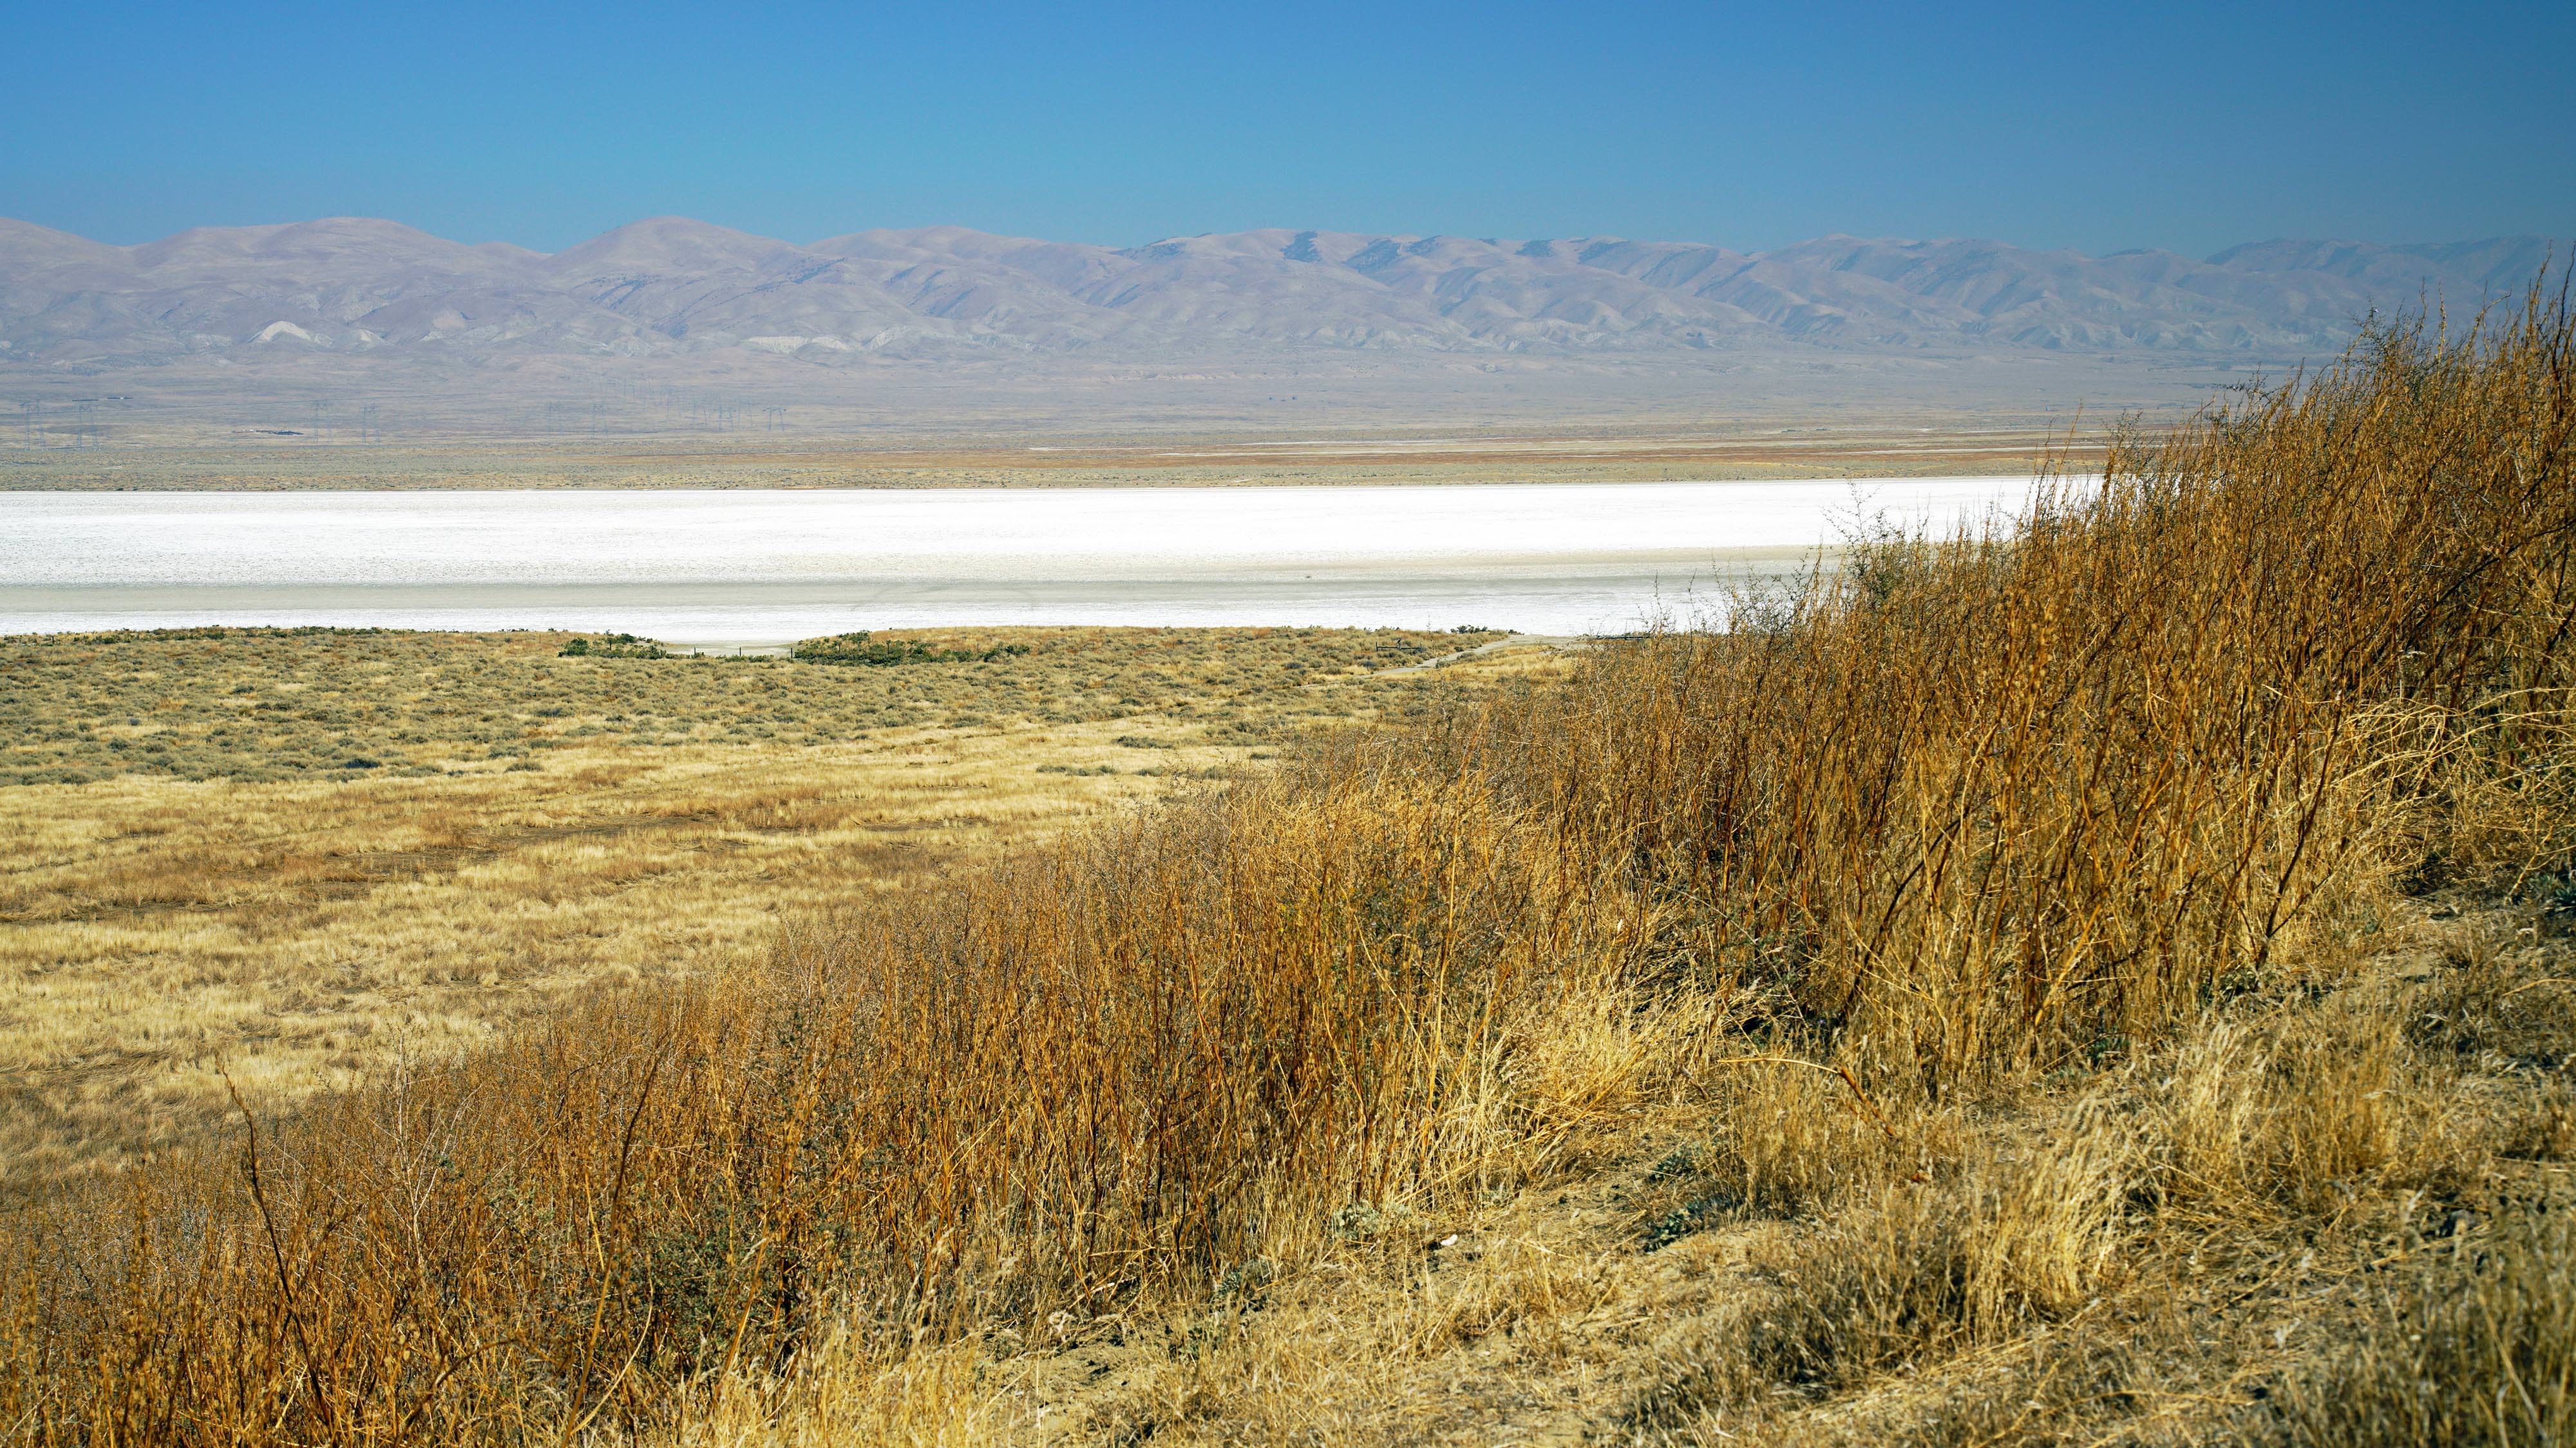 A white expanse of minerals on a dry lakebed with hills in the distance.